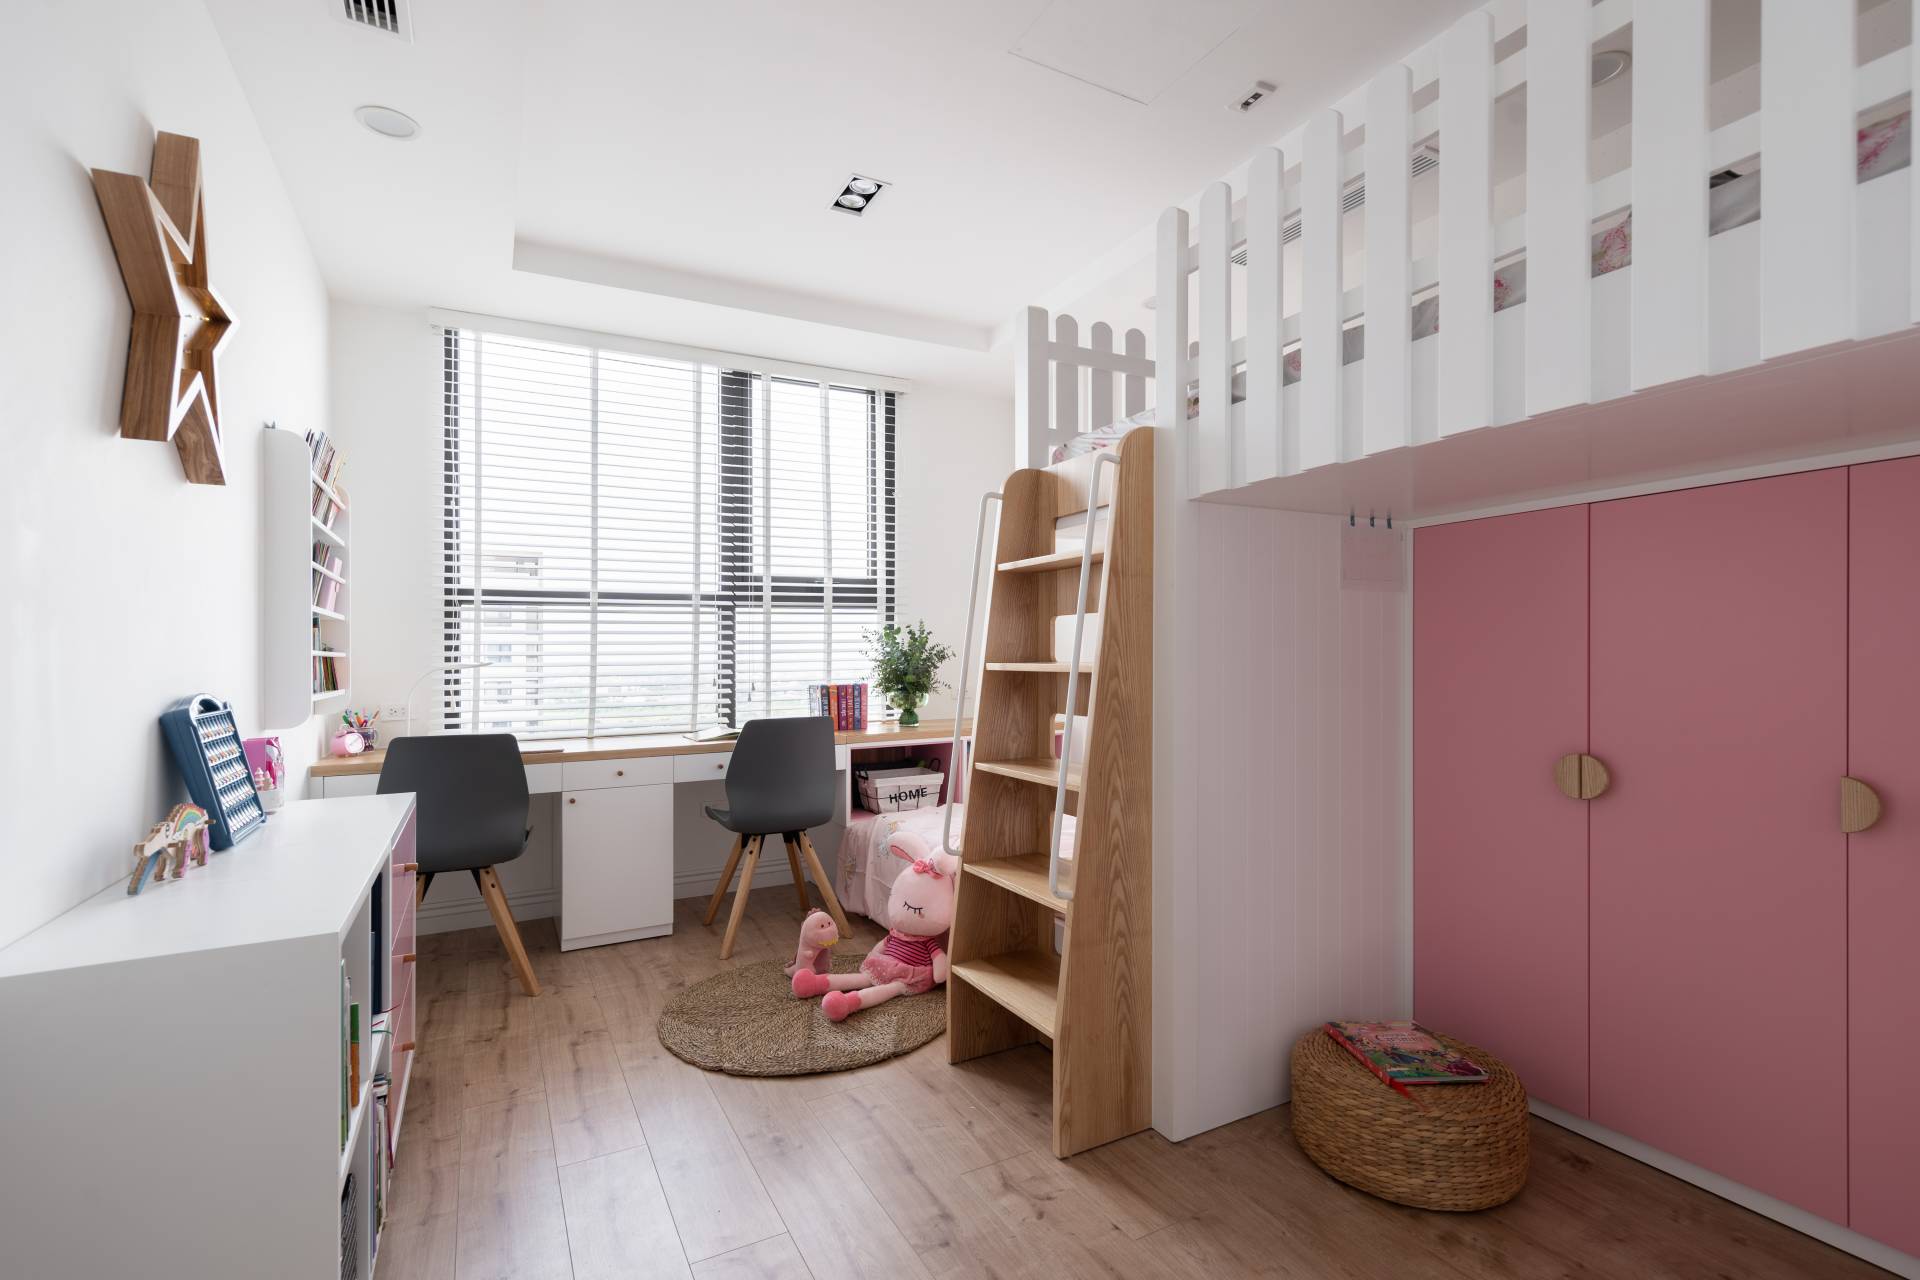 The girl's bedroom is minimalist, but still exudes innocence and sweetness.